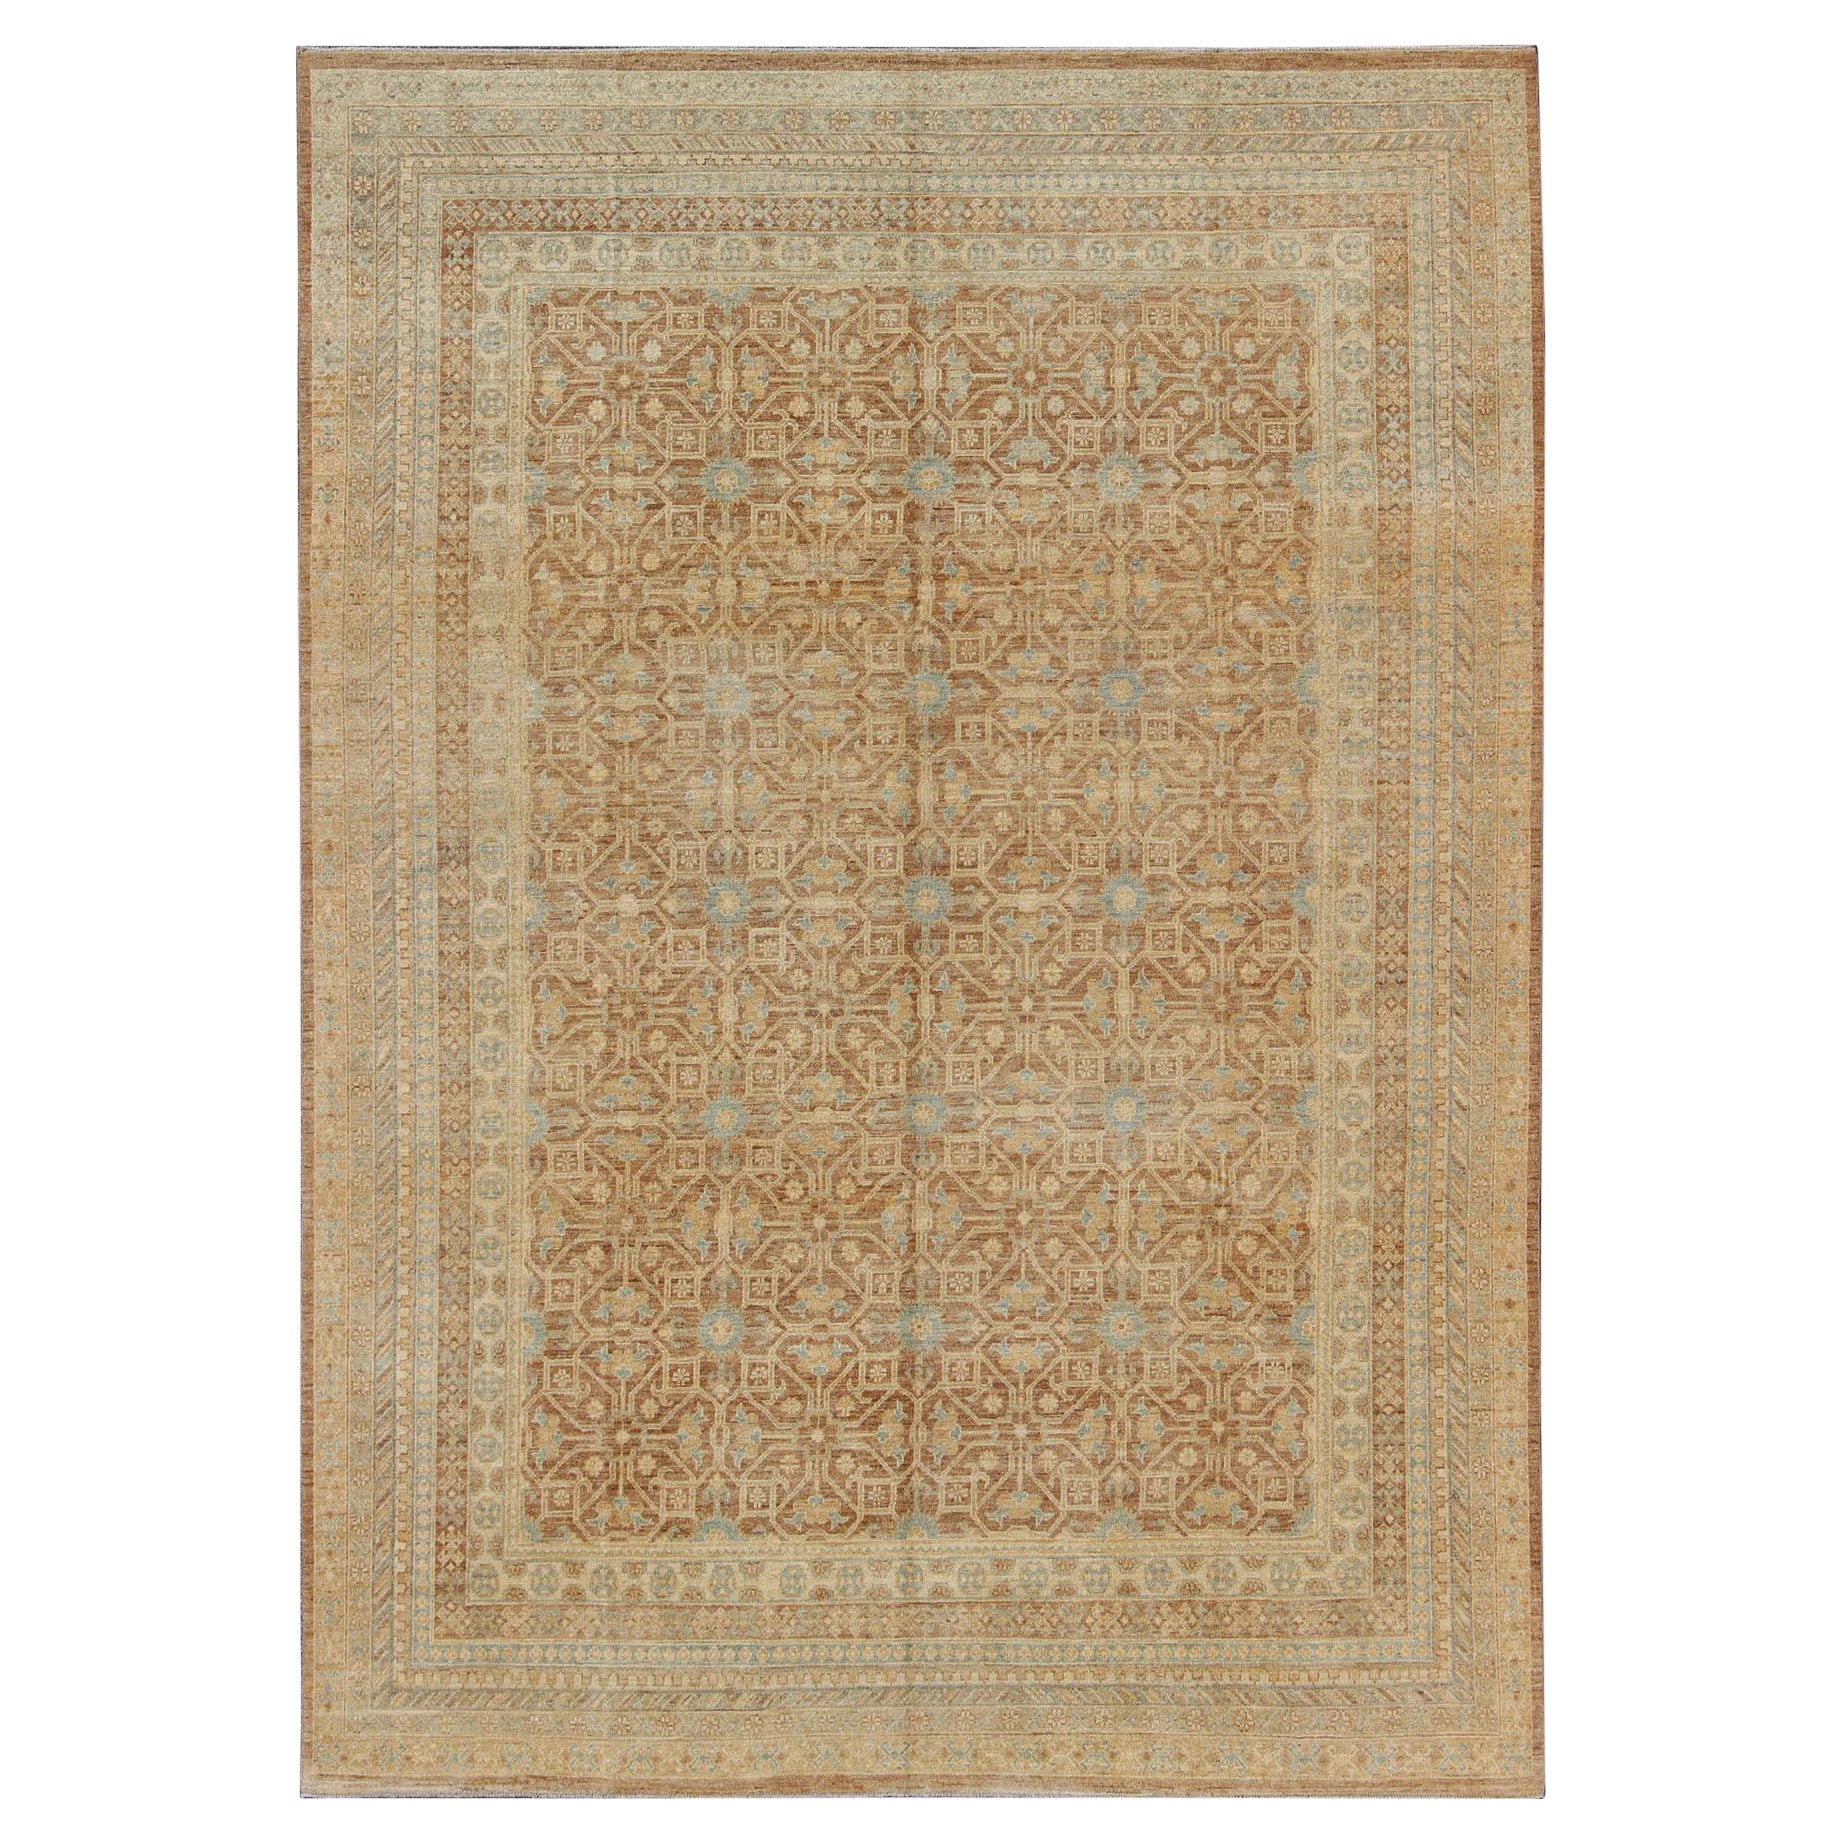 Khotan Design Rug with All-Over Geometric Pattern in Light Brown, Butter & Blue For Sale